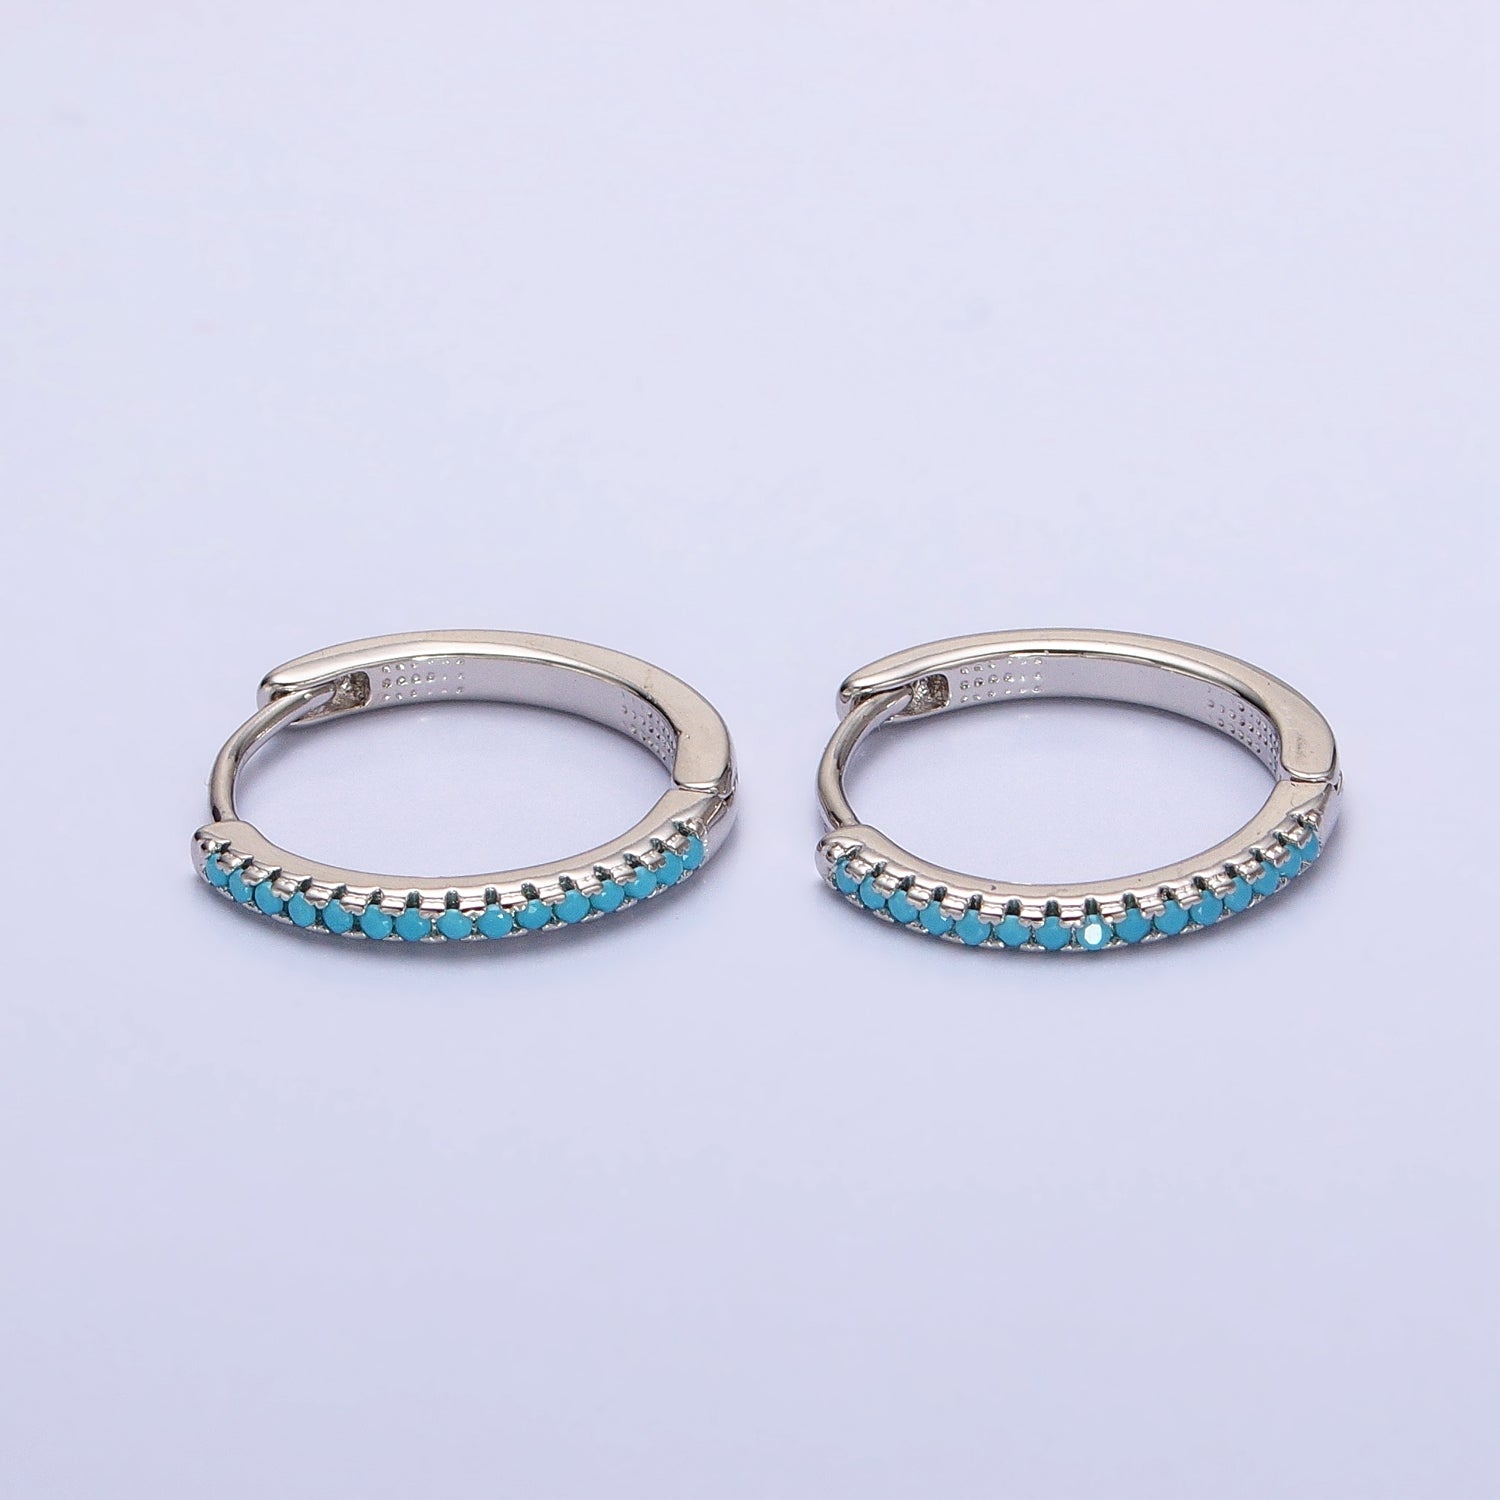 Dainty Pave Cz Hoop Earring with Clear Turquoise Multi Color Rainbow Cz Stone 17mm AD1349 AD1350 AD1352 AD1353 - DLUXCA